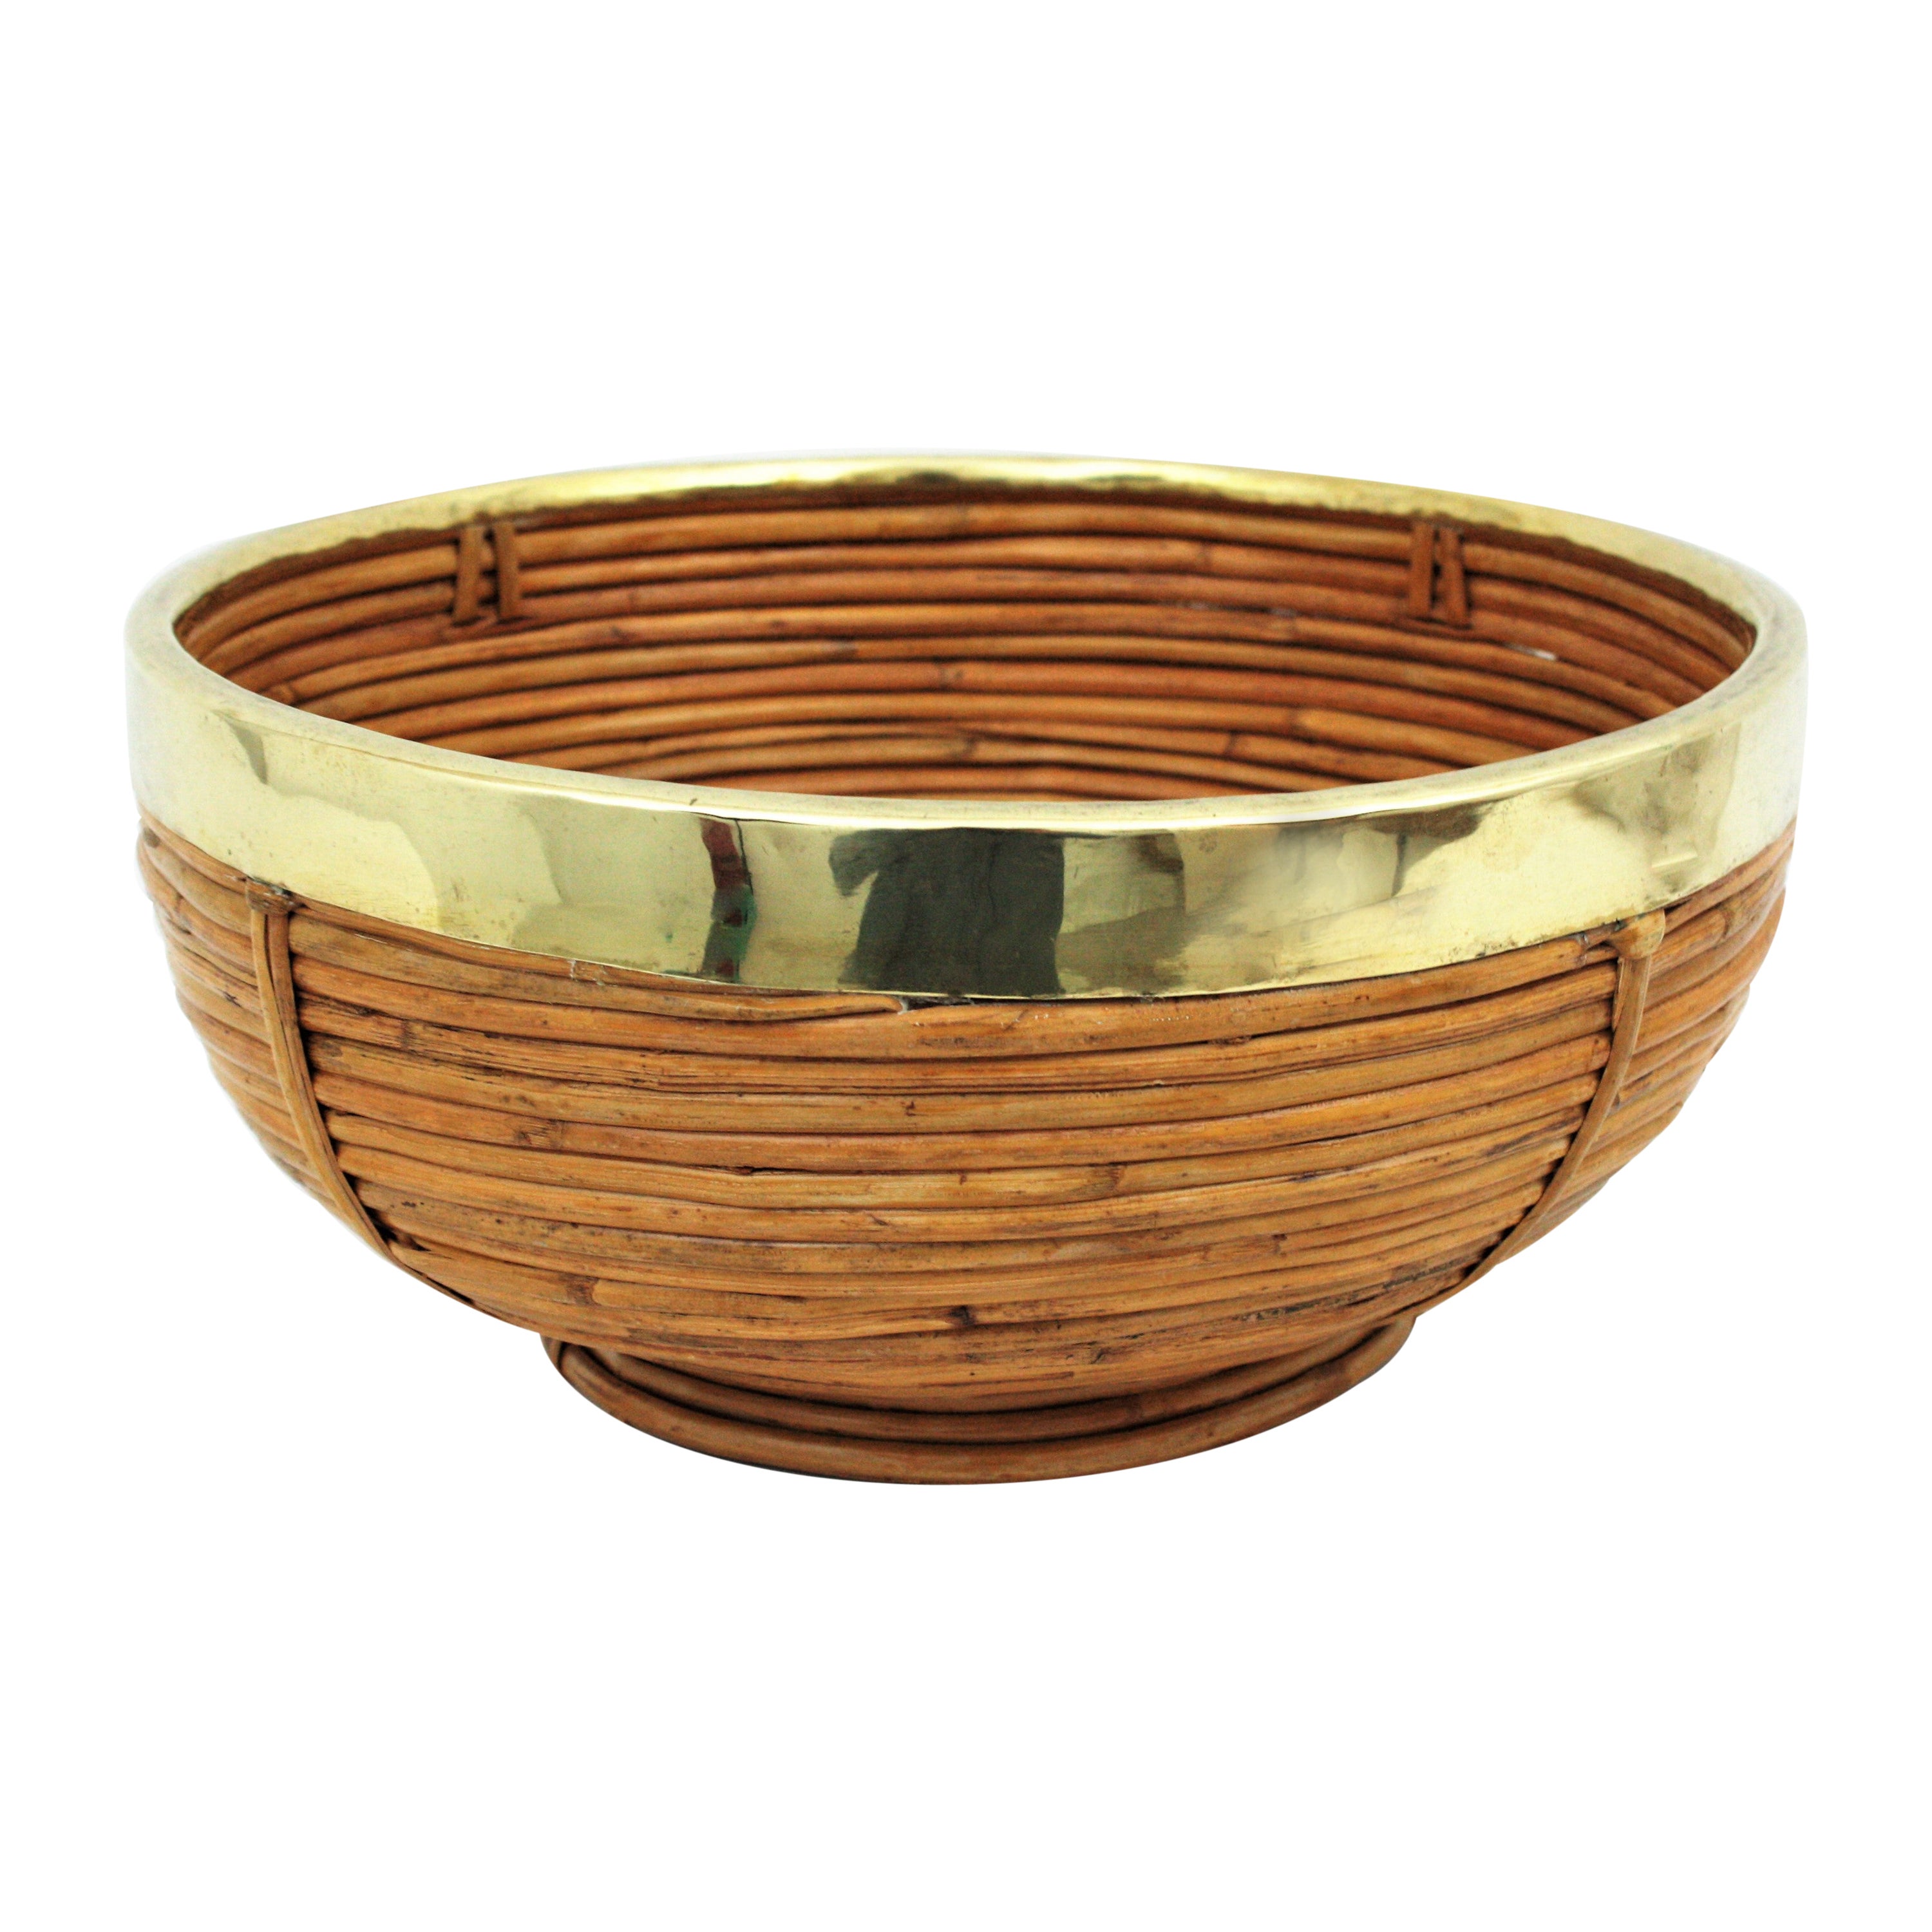 Rattan and Brass Italian Large Basket Bowl Centerpiece, 1970s For Sale